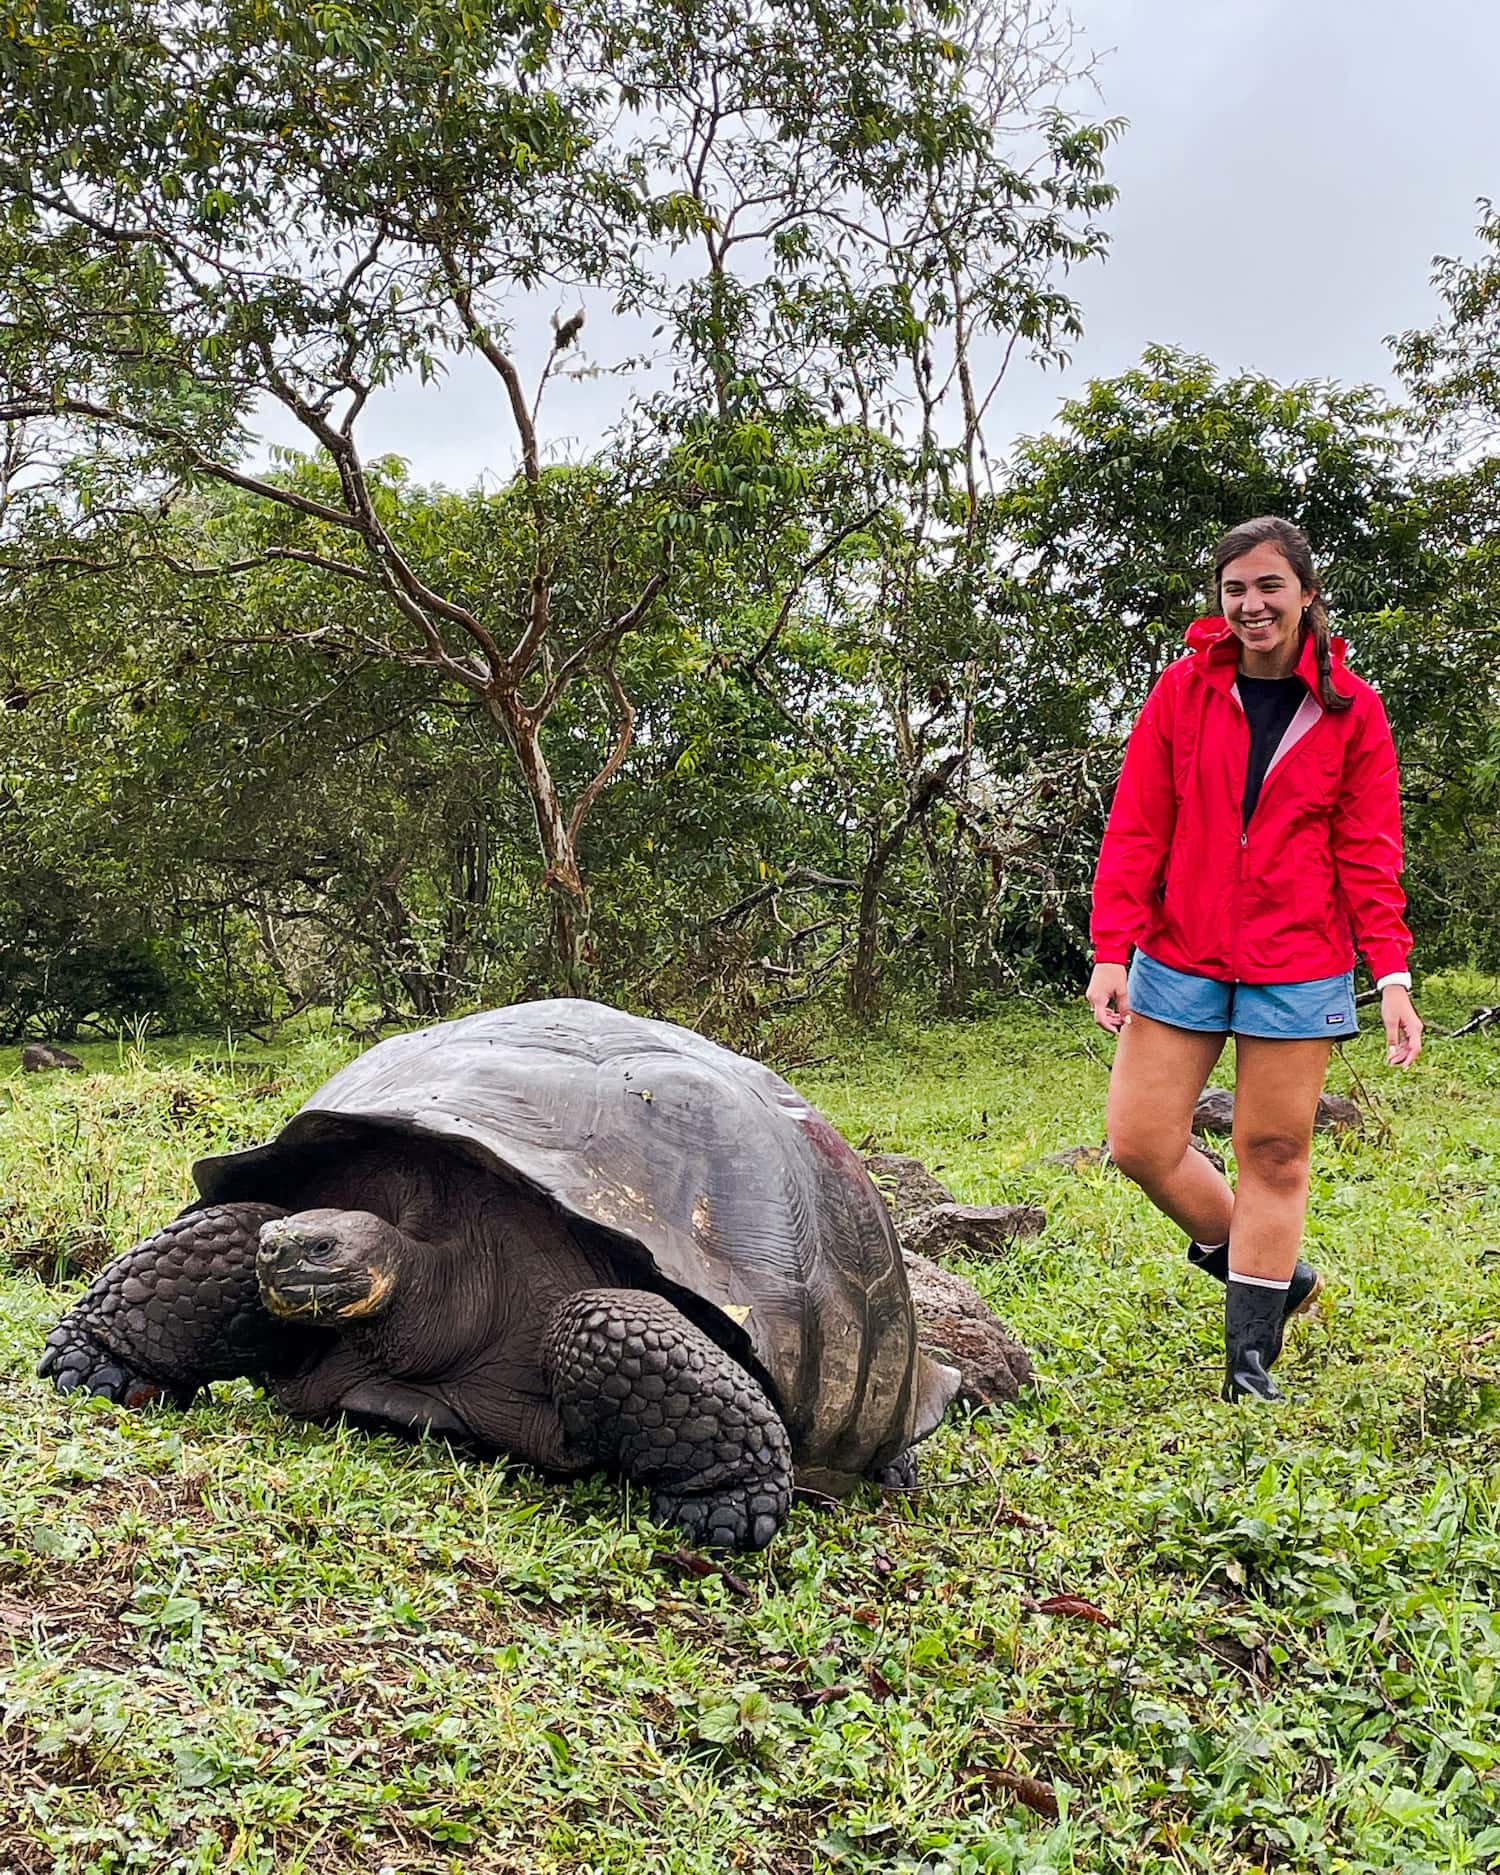 Galapagos Islands Vacation cover; Girl standing next to giant tortoise laughing